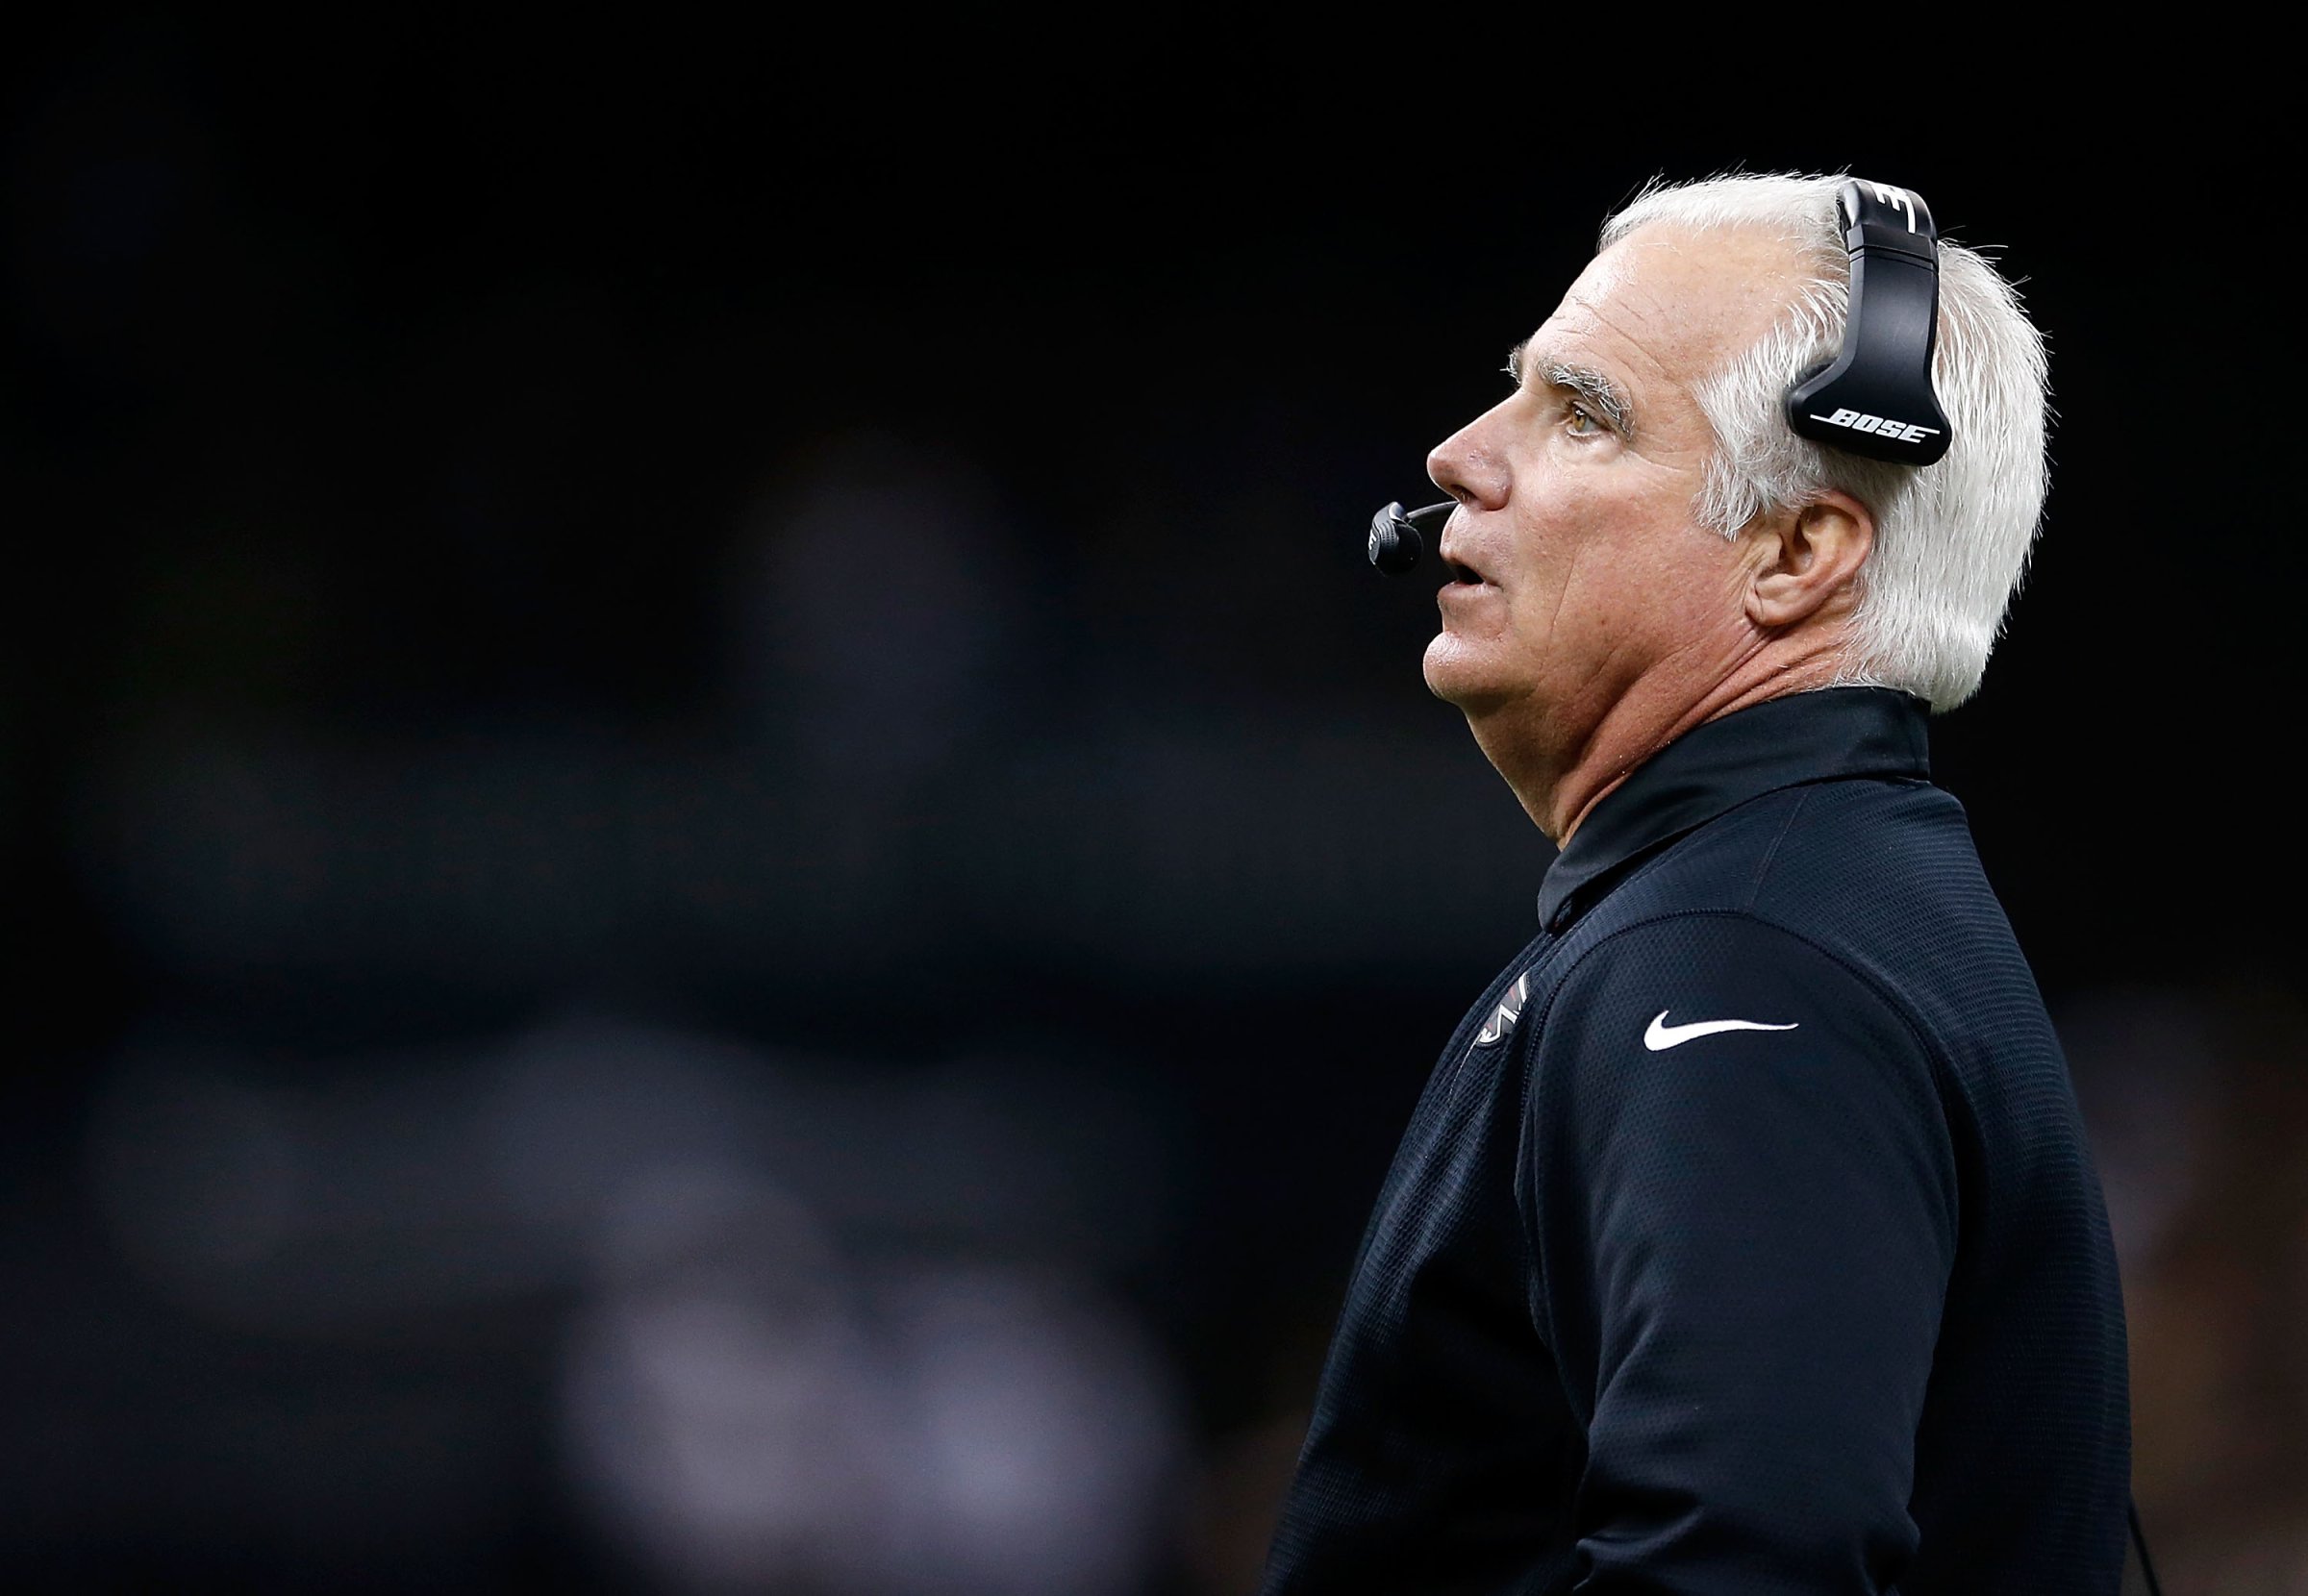 Former Atlanta Falcons Head coach Mike Smith at a game between the Atlanta Falcons and the New Orleans Saints on Dec. 21, 2014 in New Orleans.